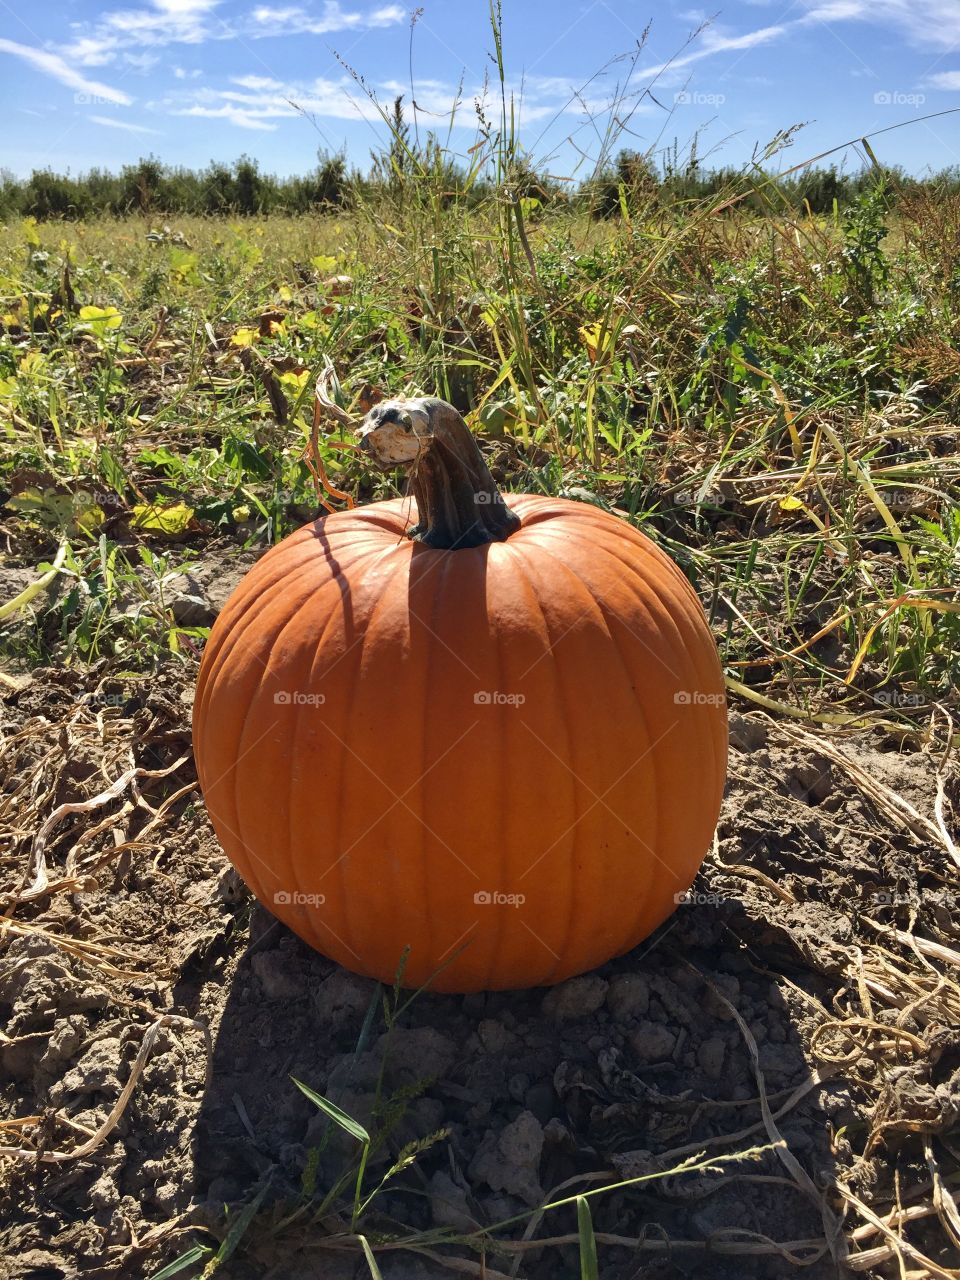 Single lonely orange pumpkin already picked and ready to be carved for Halloween 